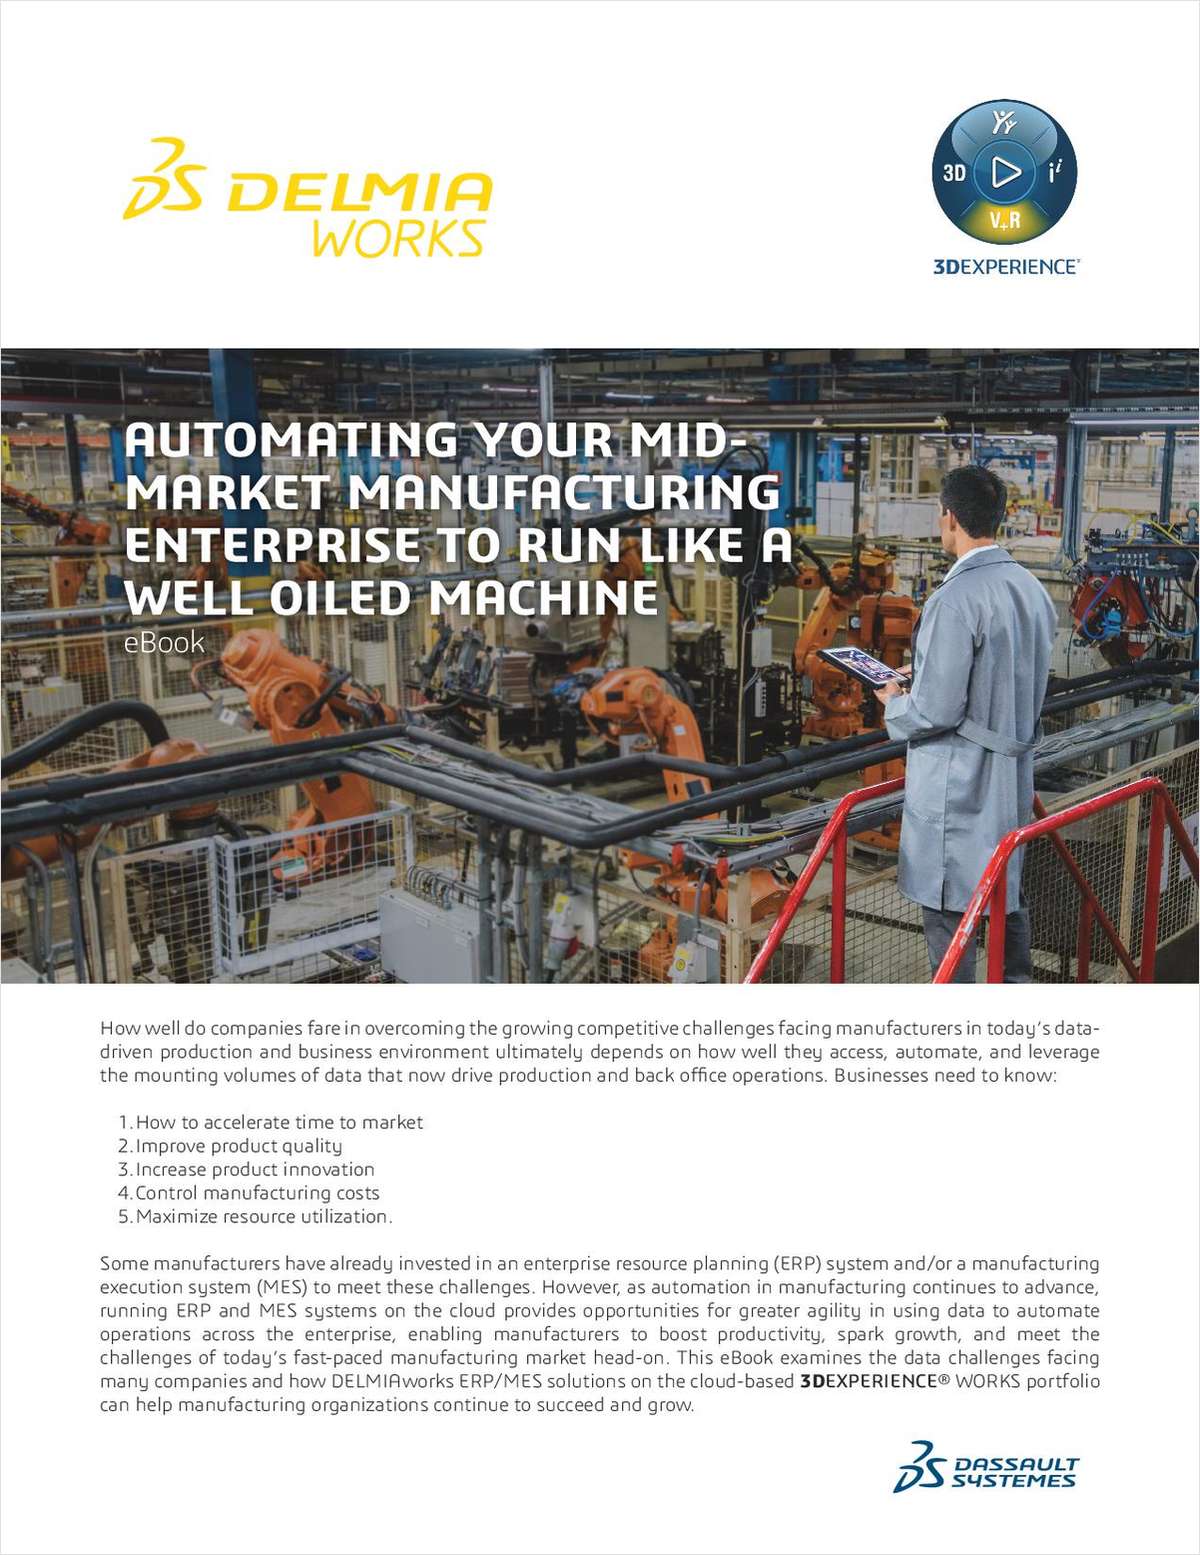 Automating Your Mid-Market Manufacturing Enterprise to Run Like a Well Oiled Machine